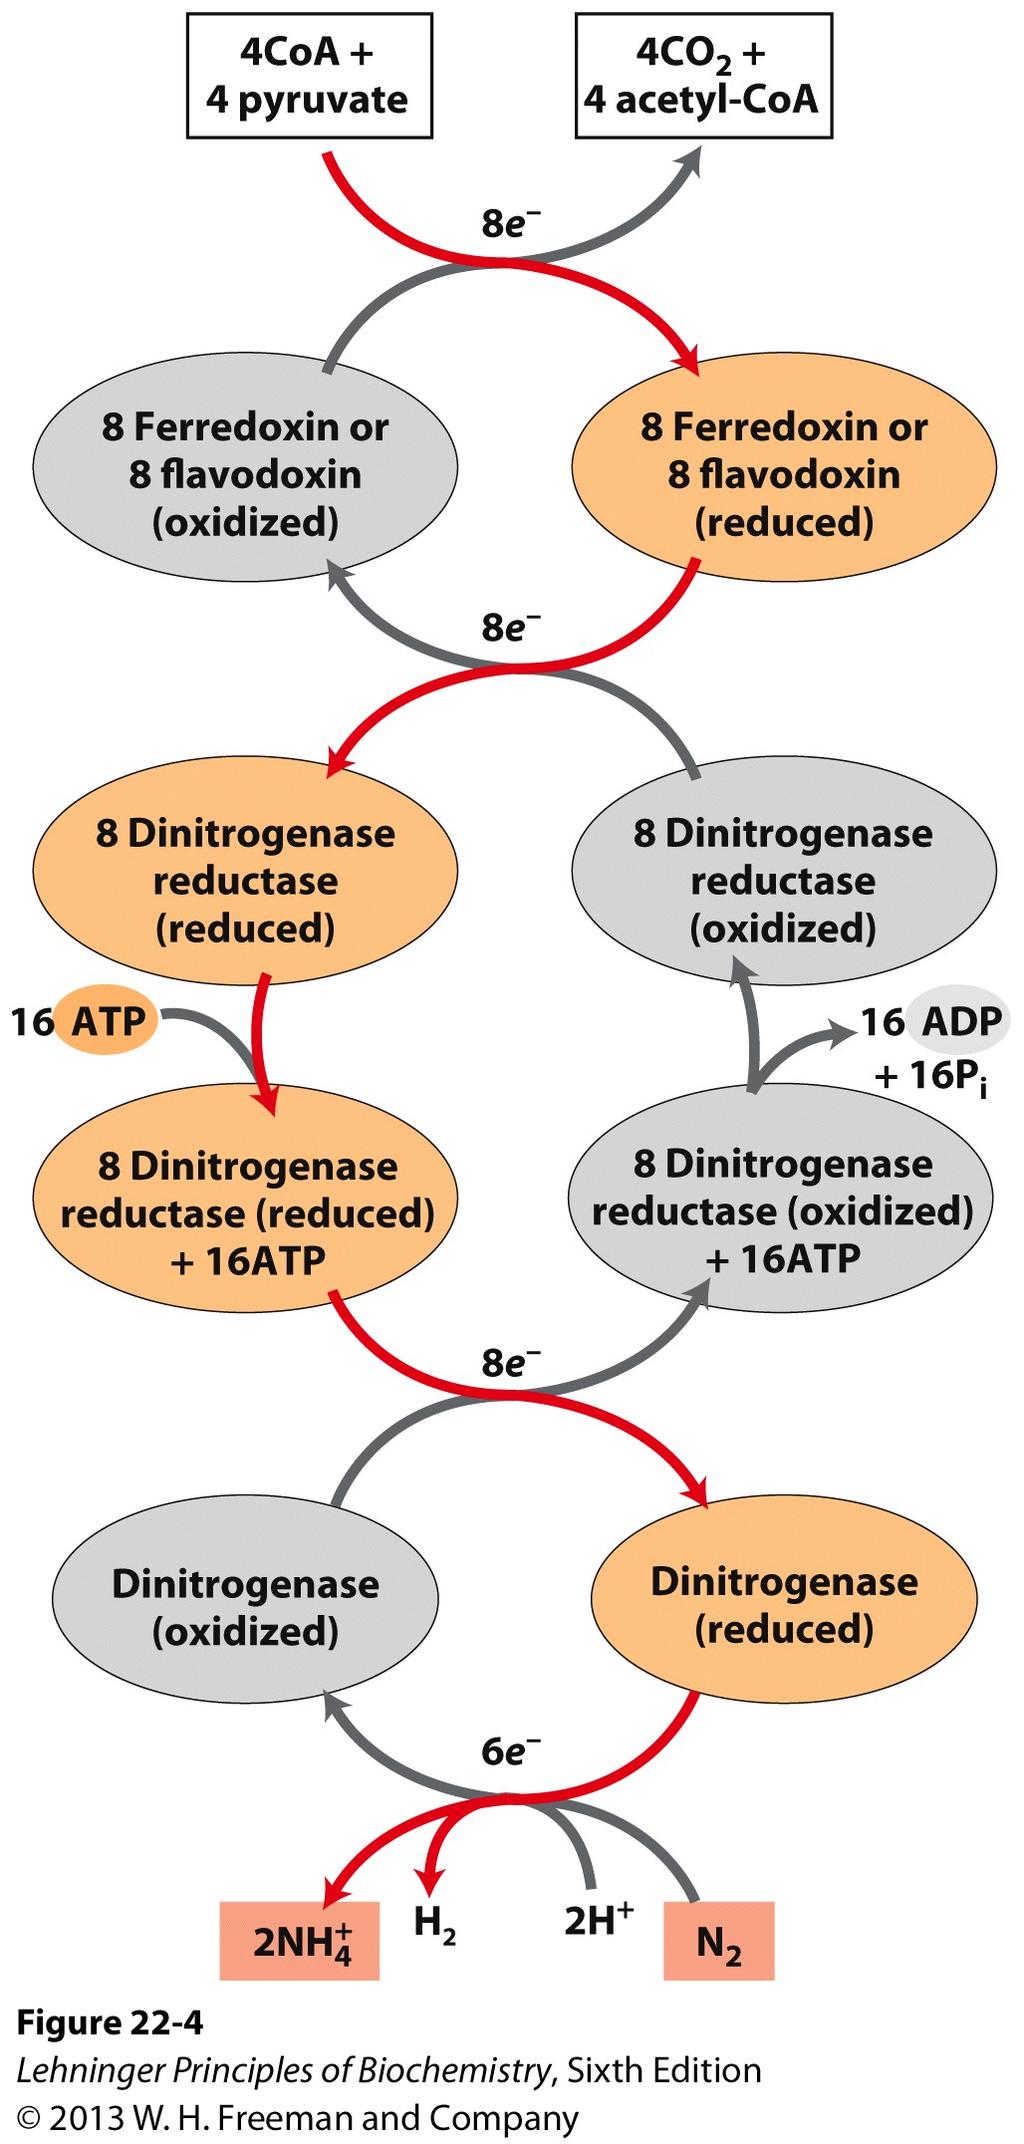 of dinitrogenase reductase One electron at a time is transferred from ferredoxin to dinitrogenase reductase M cluster Reduction of dinitrogenase The complex